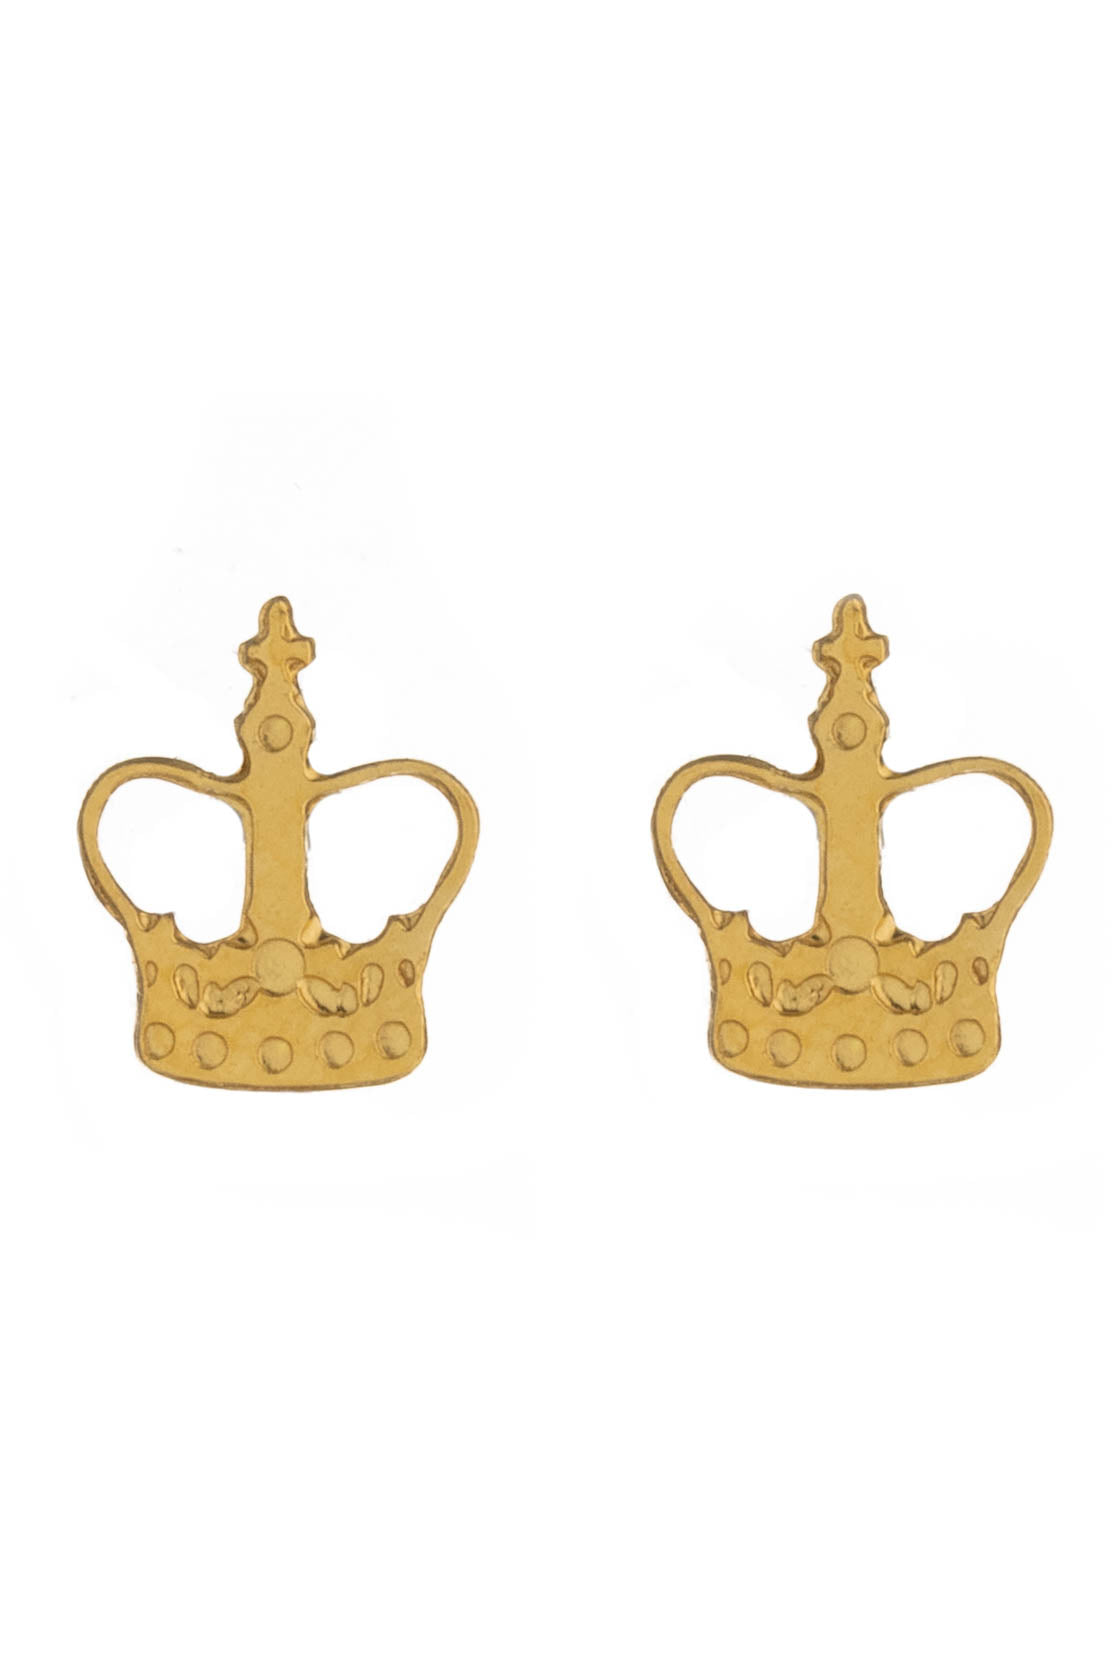 Coronation Crown Limited Edition Stud Earrings In Sterling Silver